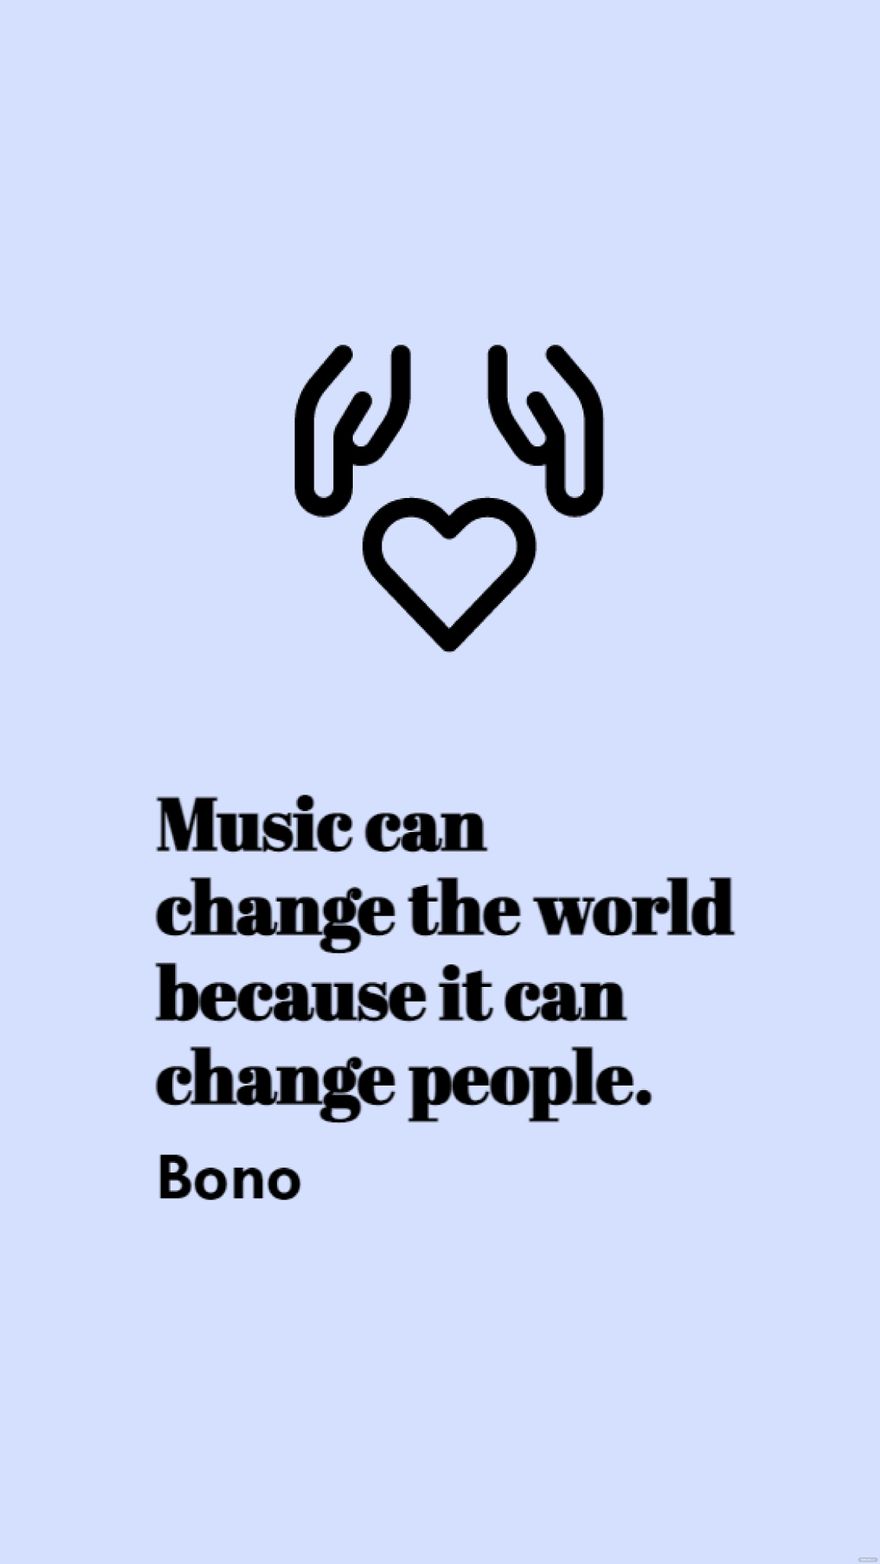 Bono - Music can change the world because it can change people.